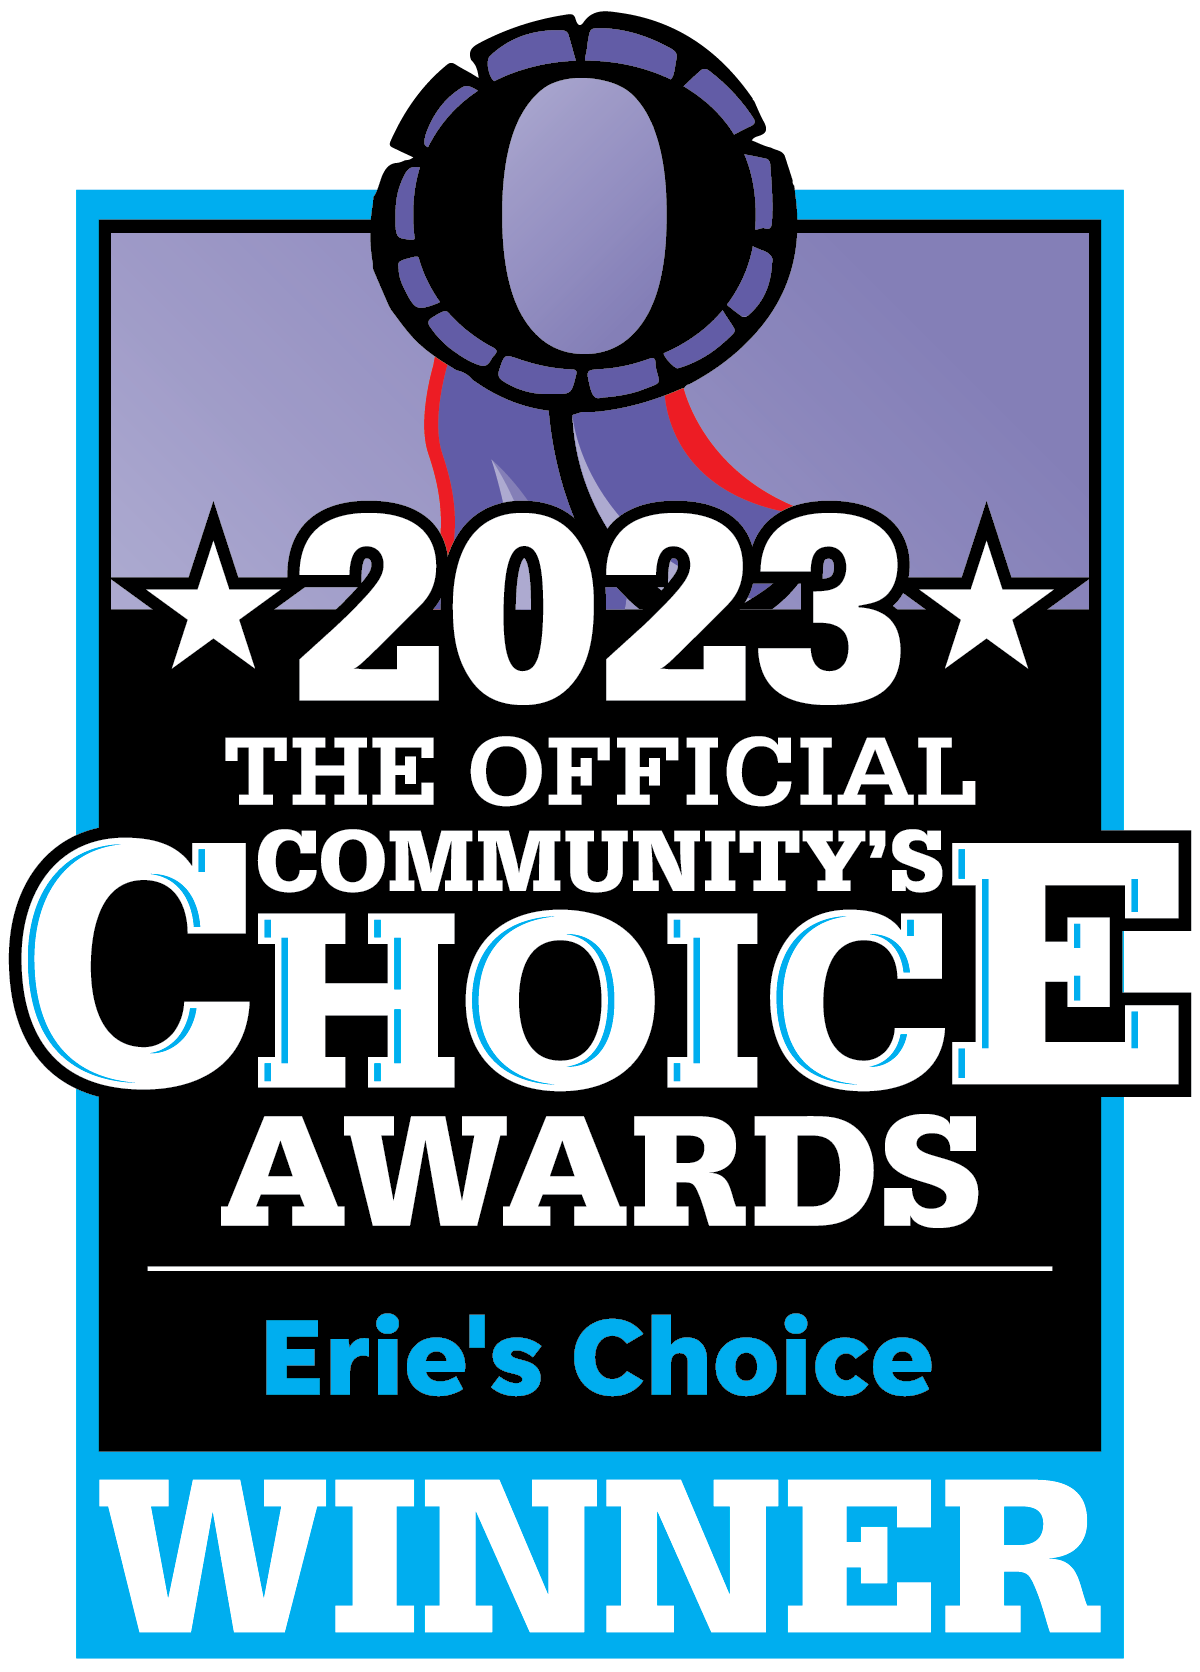 The Official Community Choice Awards